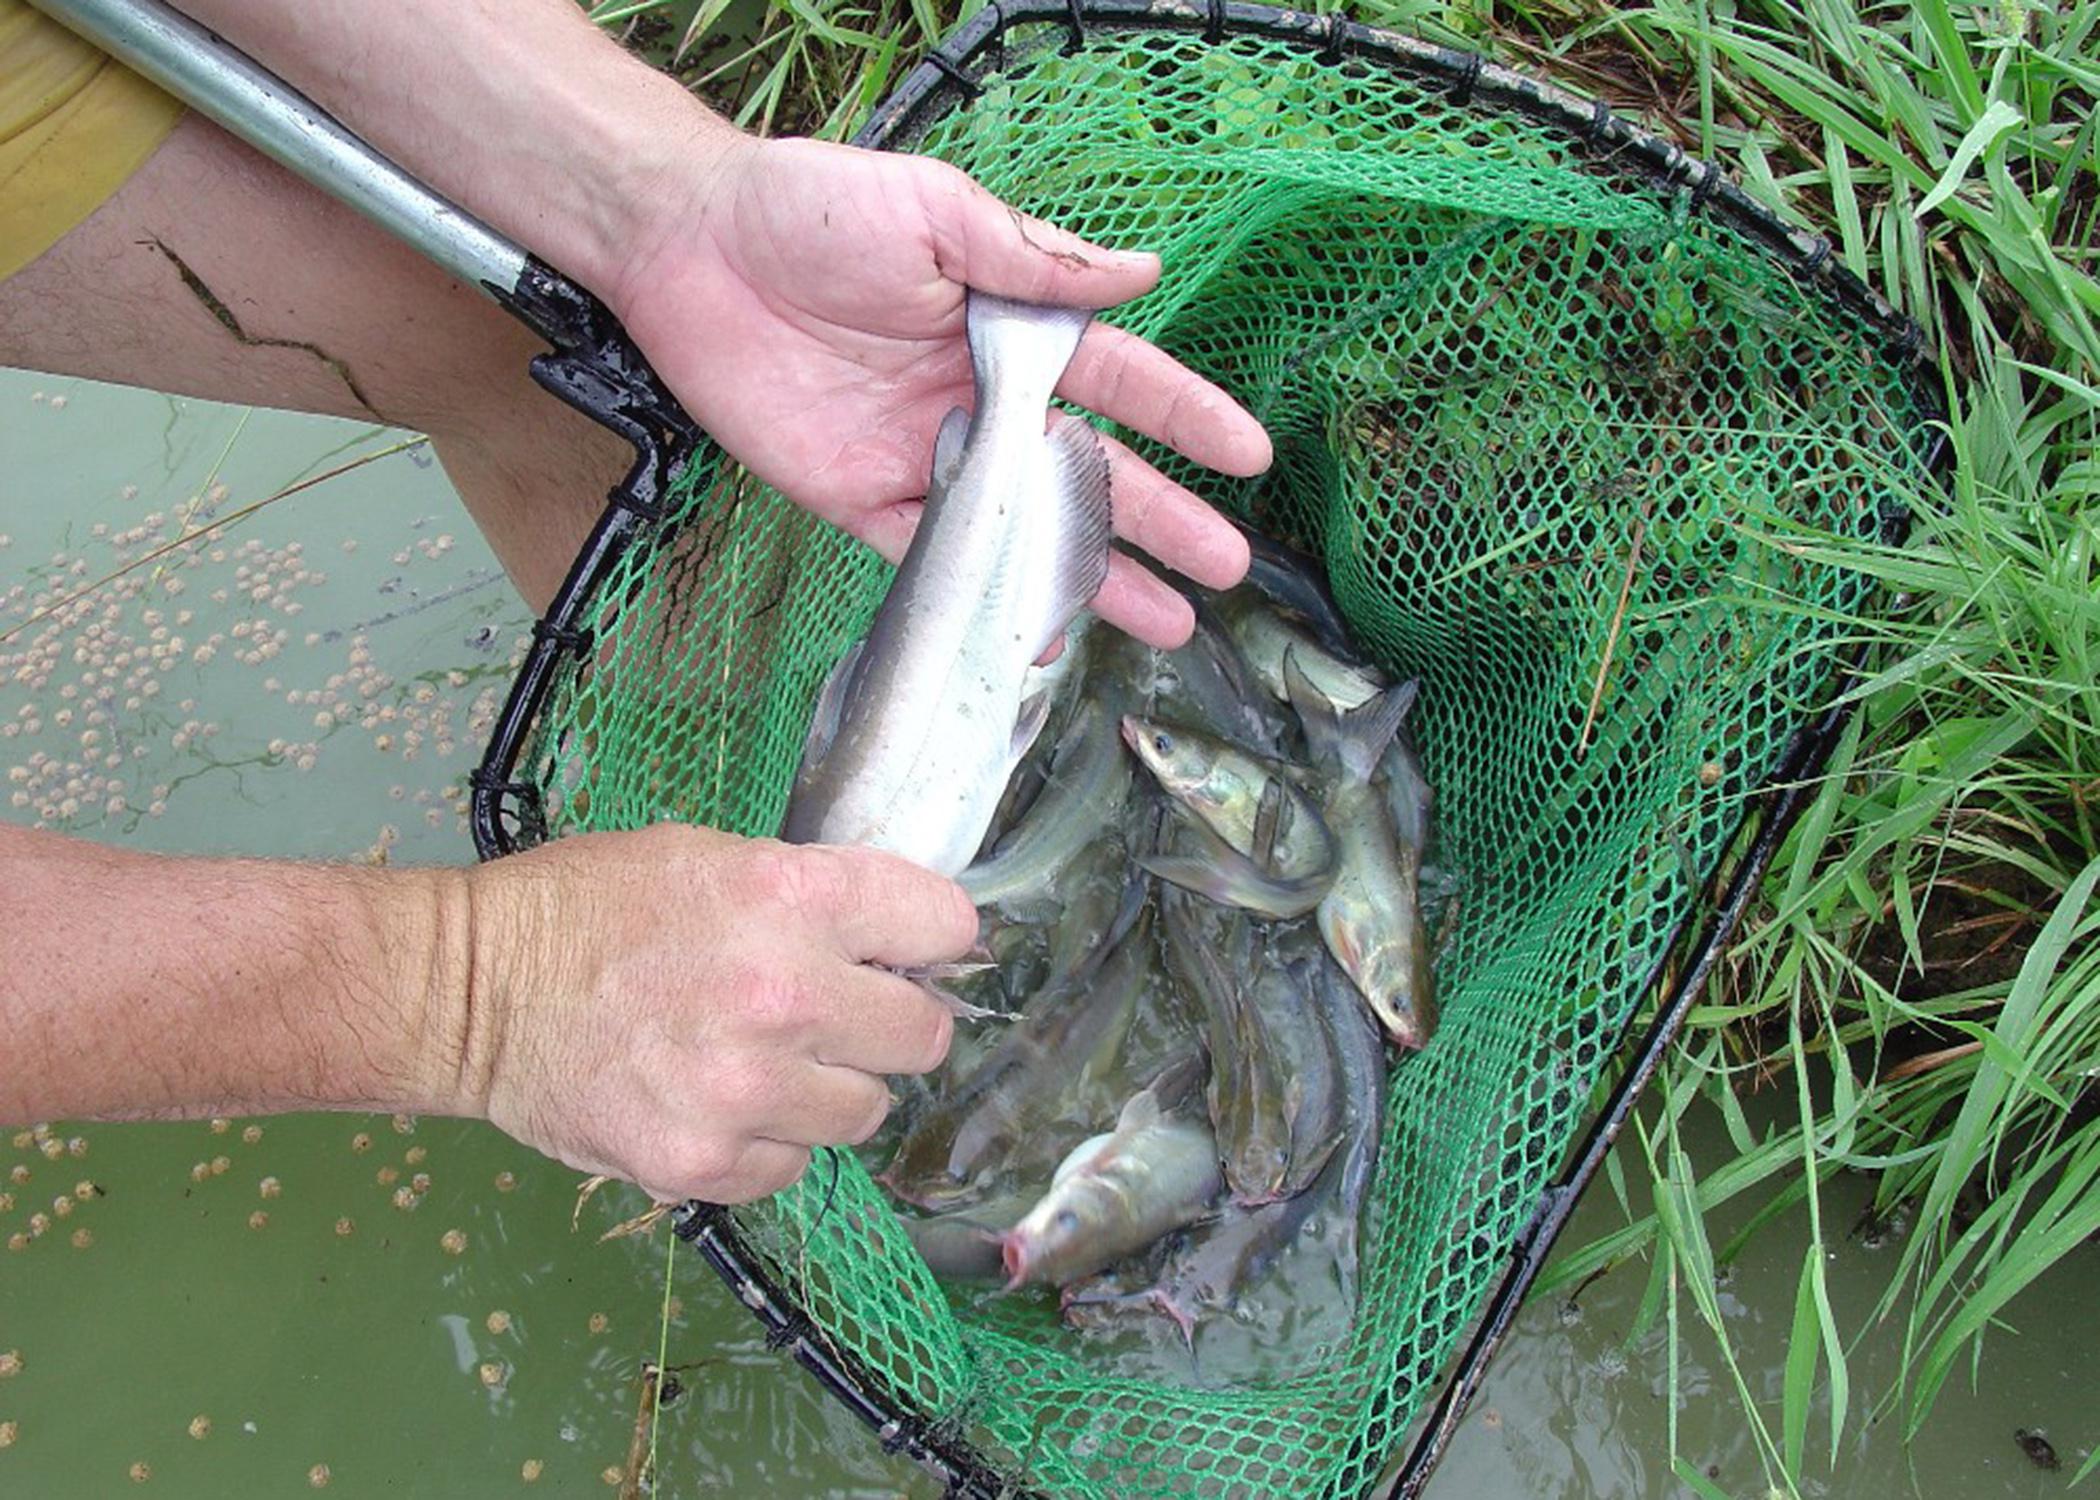 This pond-raised catfish has been infected by trematodes, visible as bumps just under the skin. This parasite reduces catfish feed consumption, which increases the time it takes for fish to grow to market size. (Photo by MSU Delta Research and Extension Center/Jimmy Avery)